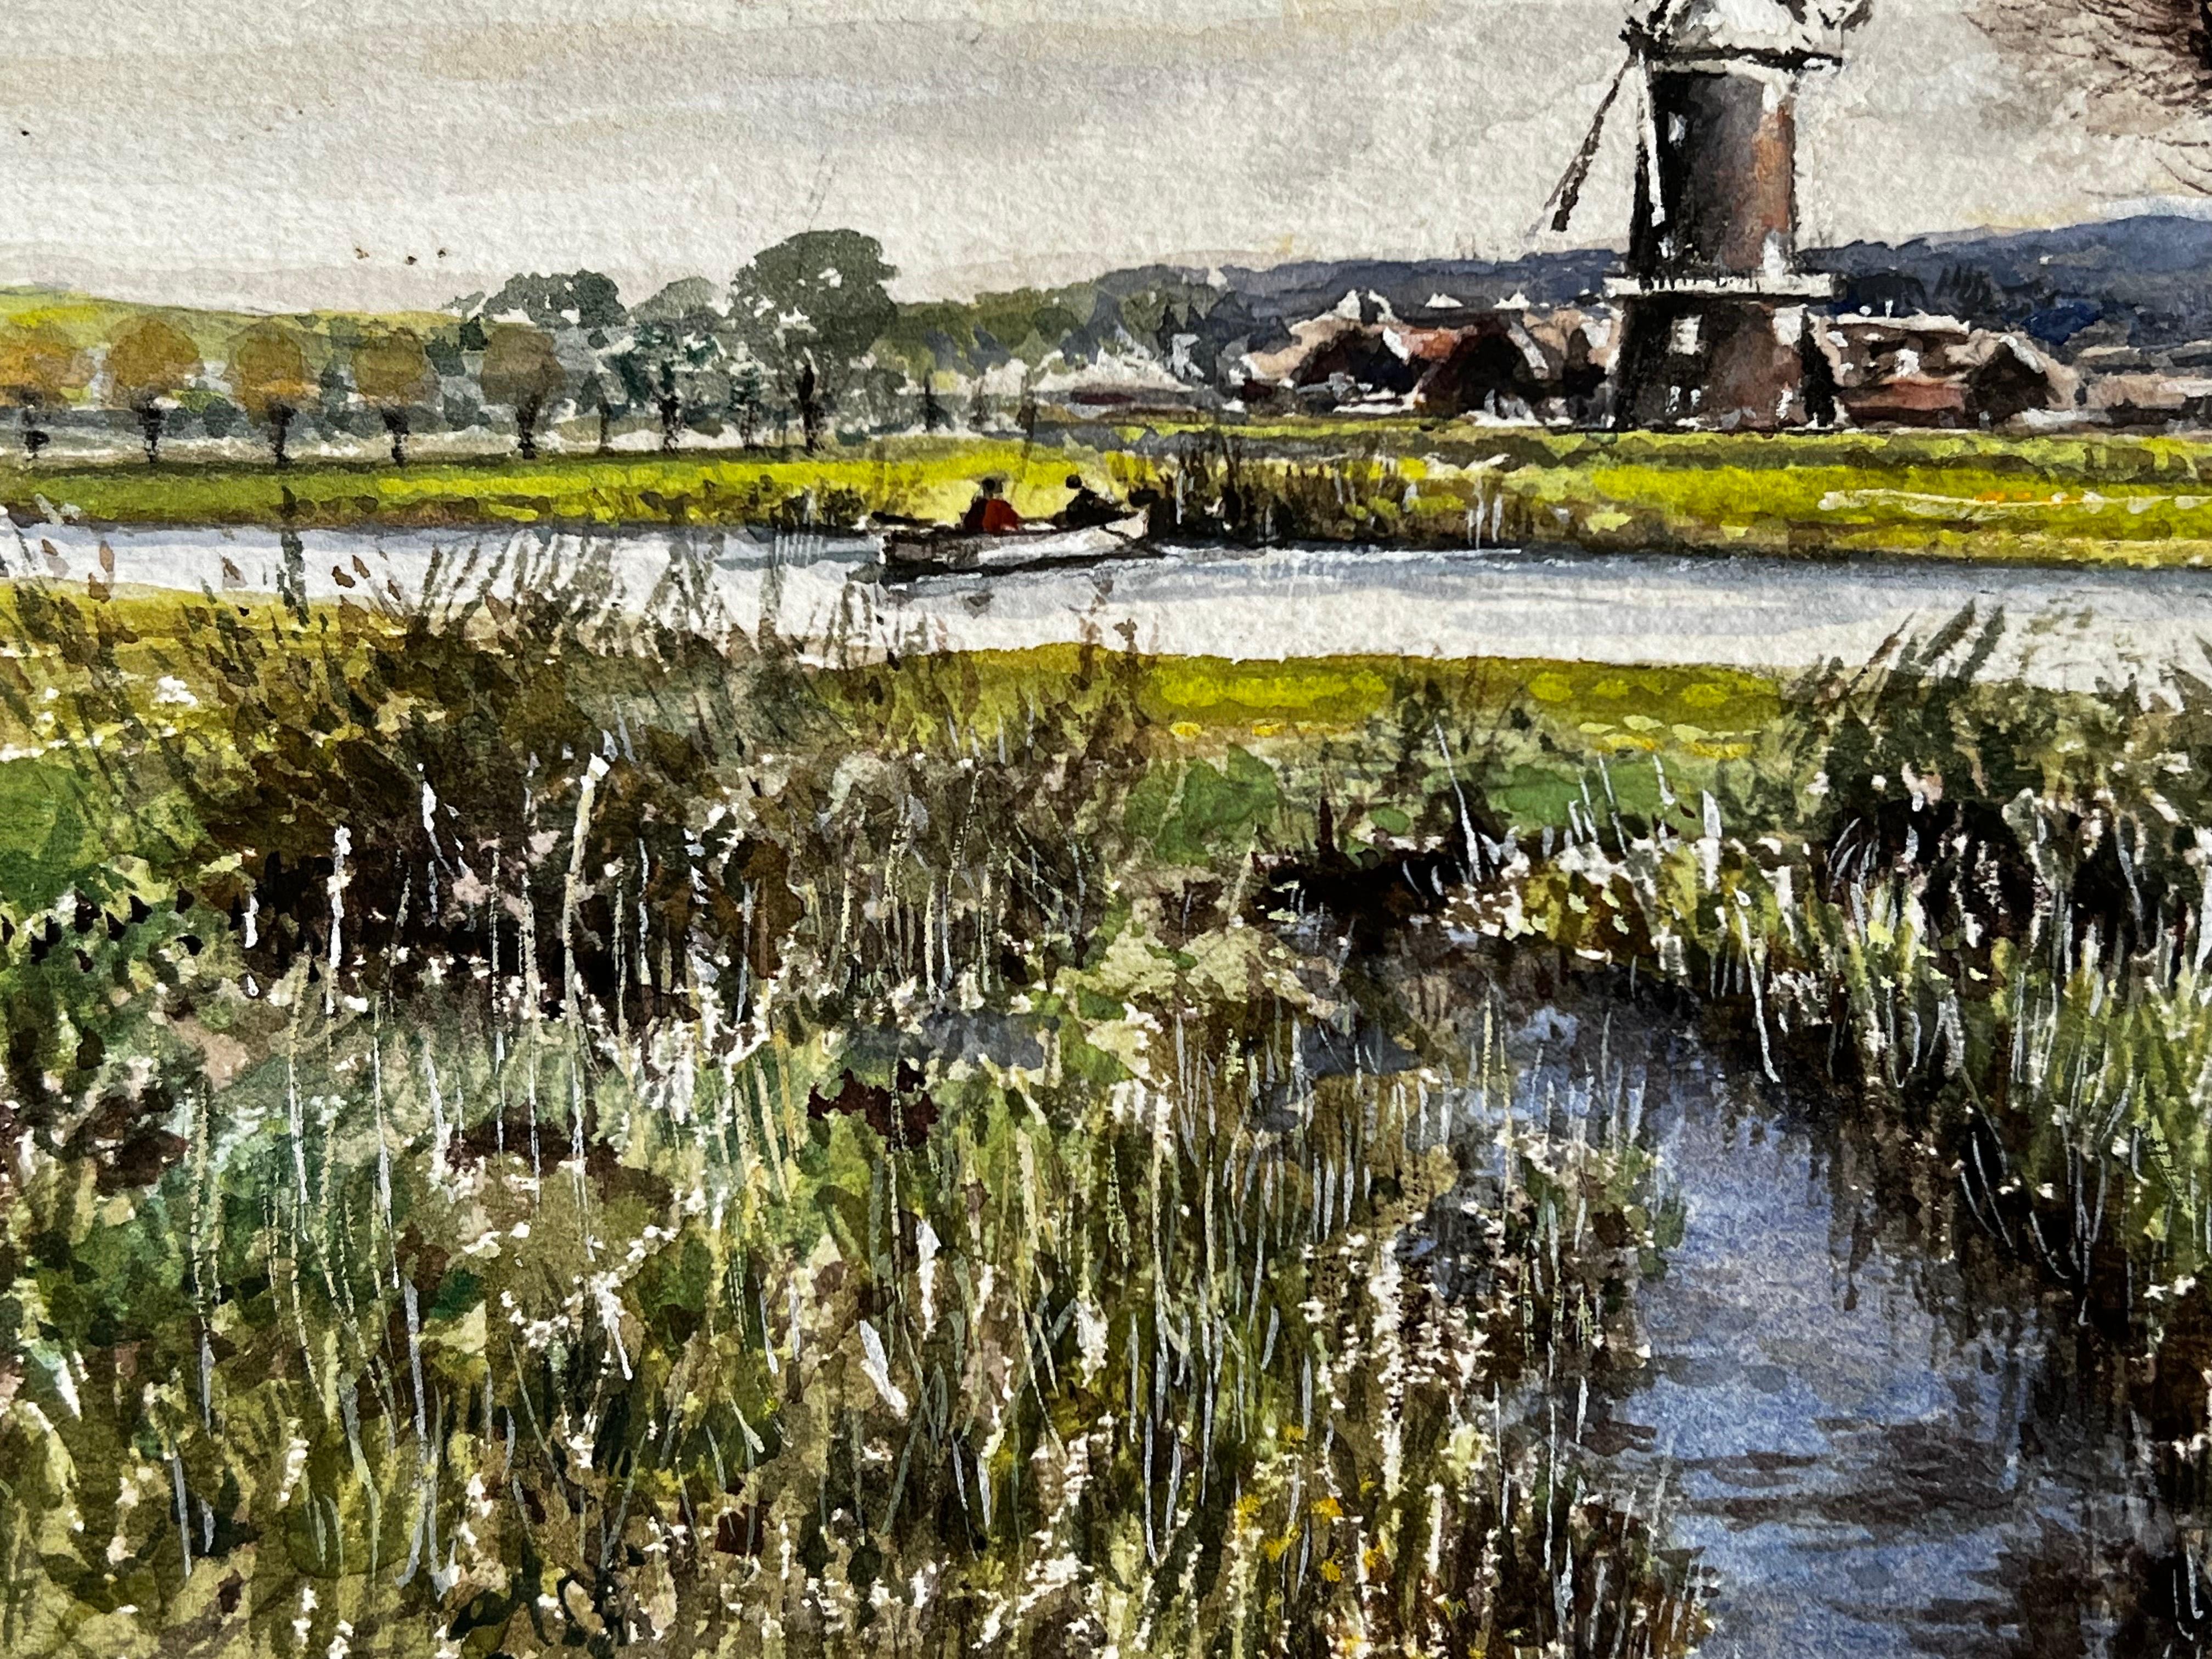 Artist/ School: Norman A.Olley ( British, 20th Century) dated 1992 and inscribed verso

Title - Mill beyond the marshes

Medium: gouache/watercolour/ ink/ pencil on artist paper, unframed 

Painting : 10.5 x 14.5 inches

Provenance: all the